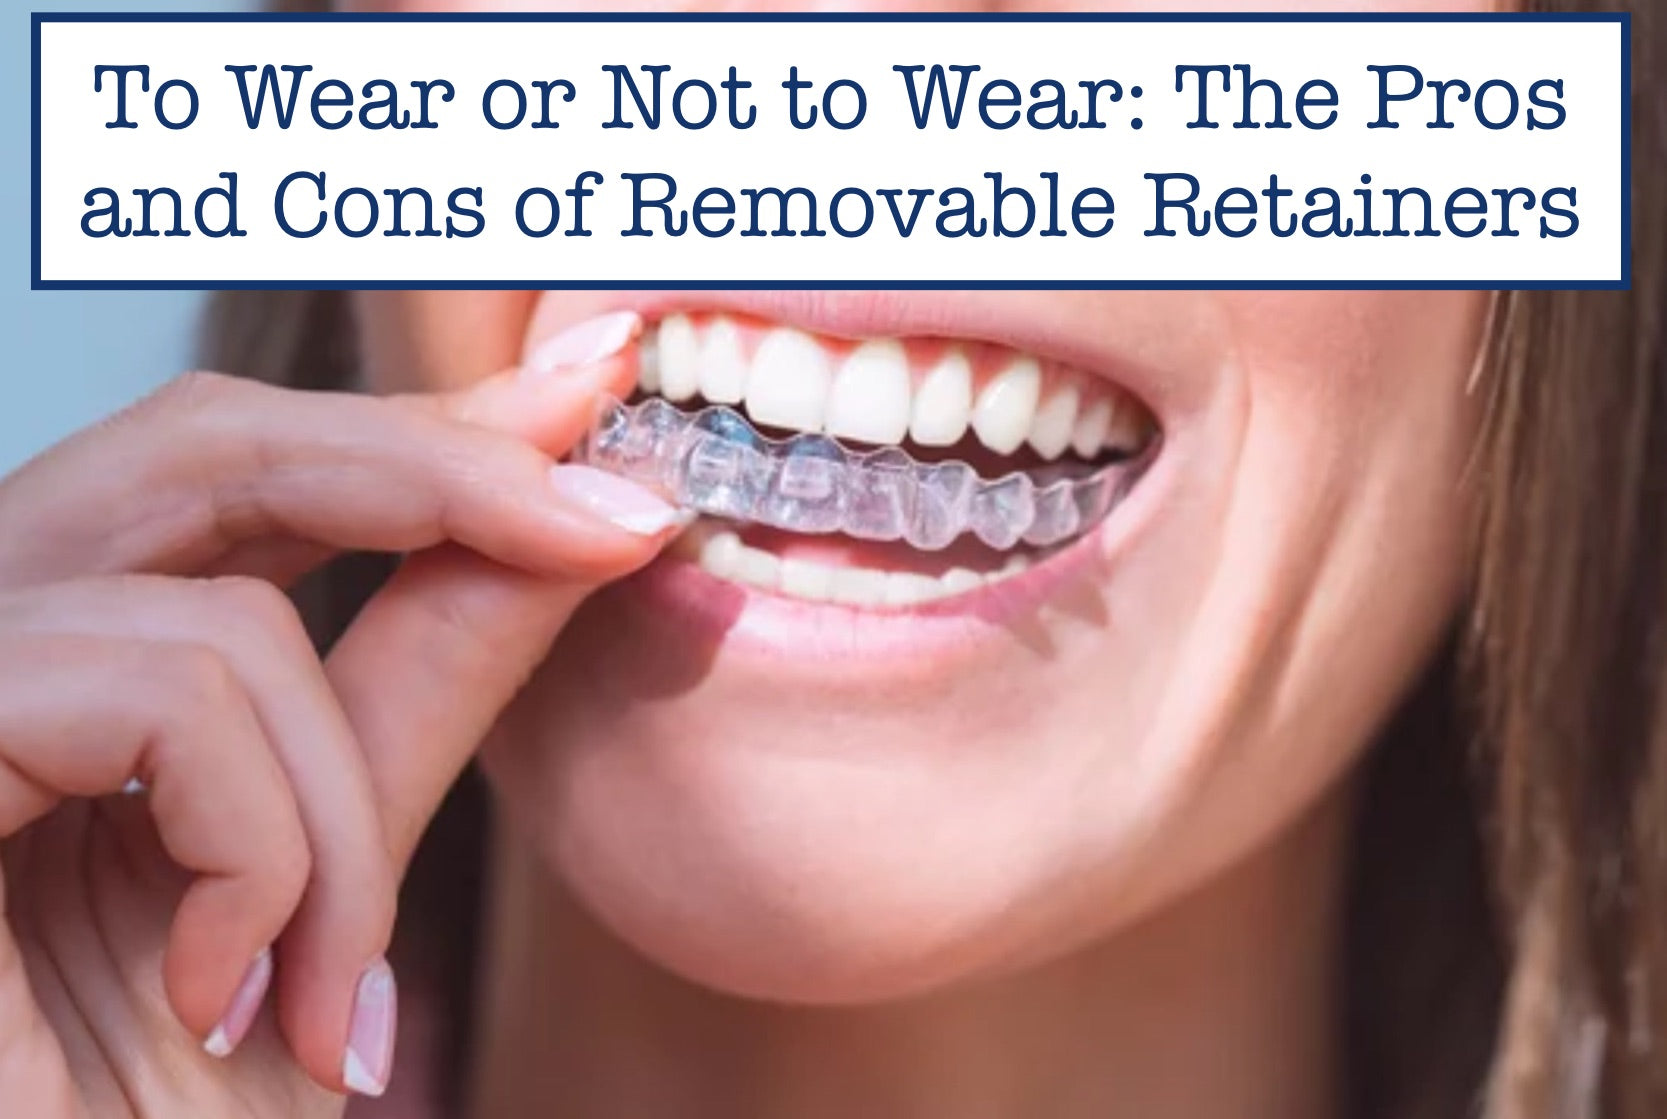 To Wear or Not to Wear: The Pros and Cons of Removable Retainers